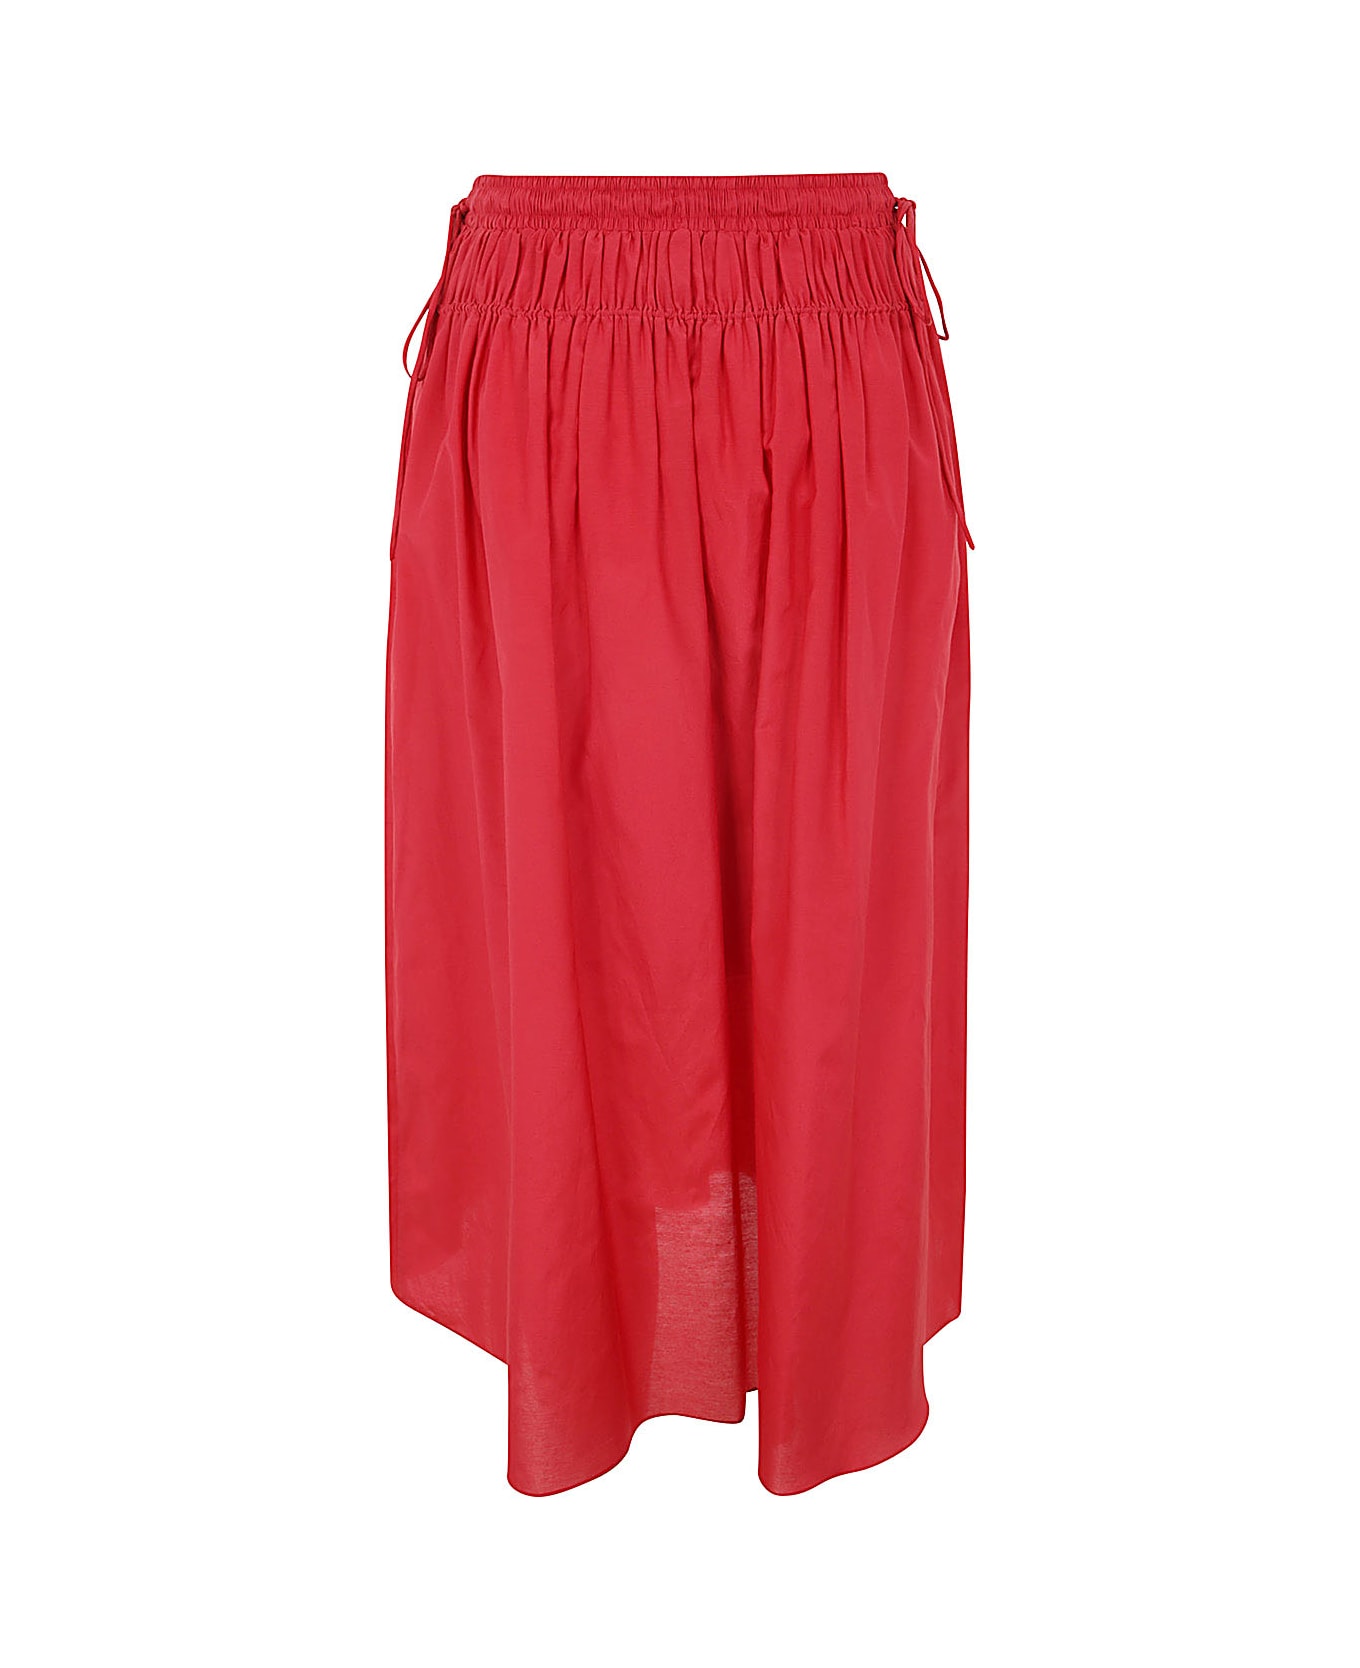 Paul Smith Popeline Skirt With Curl On Waist - Red スカート